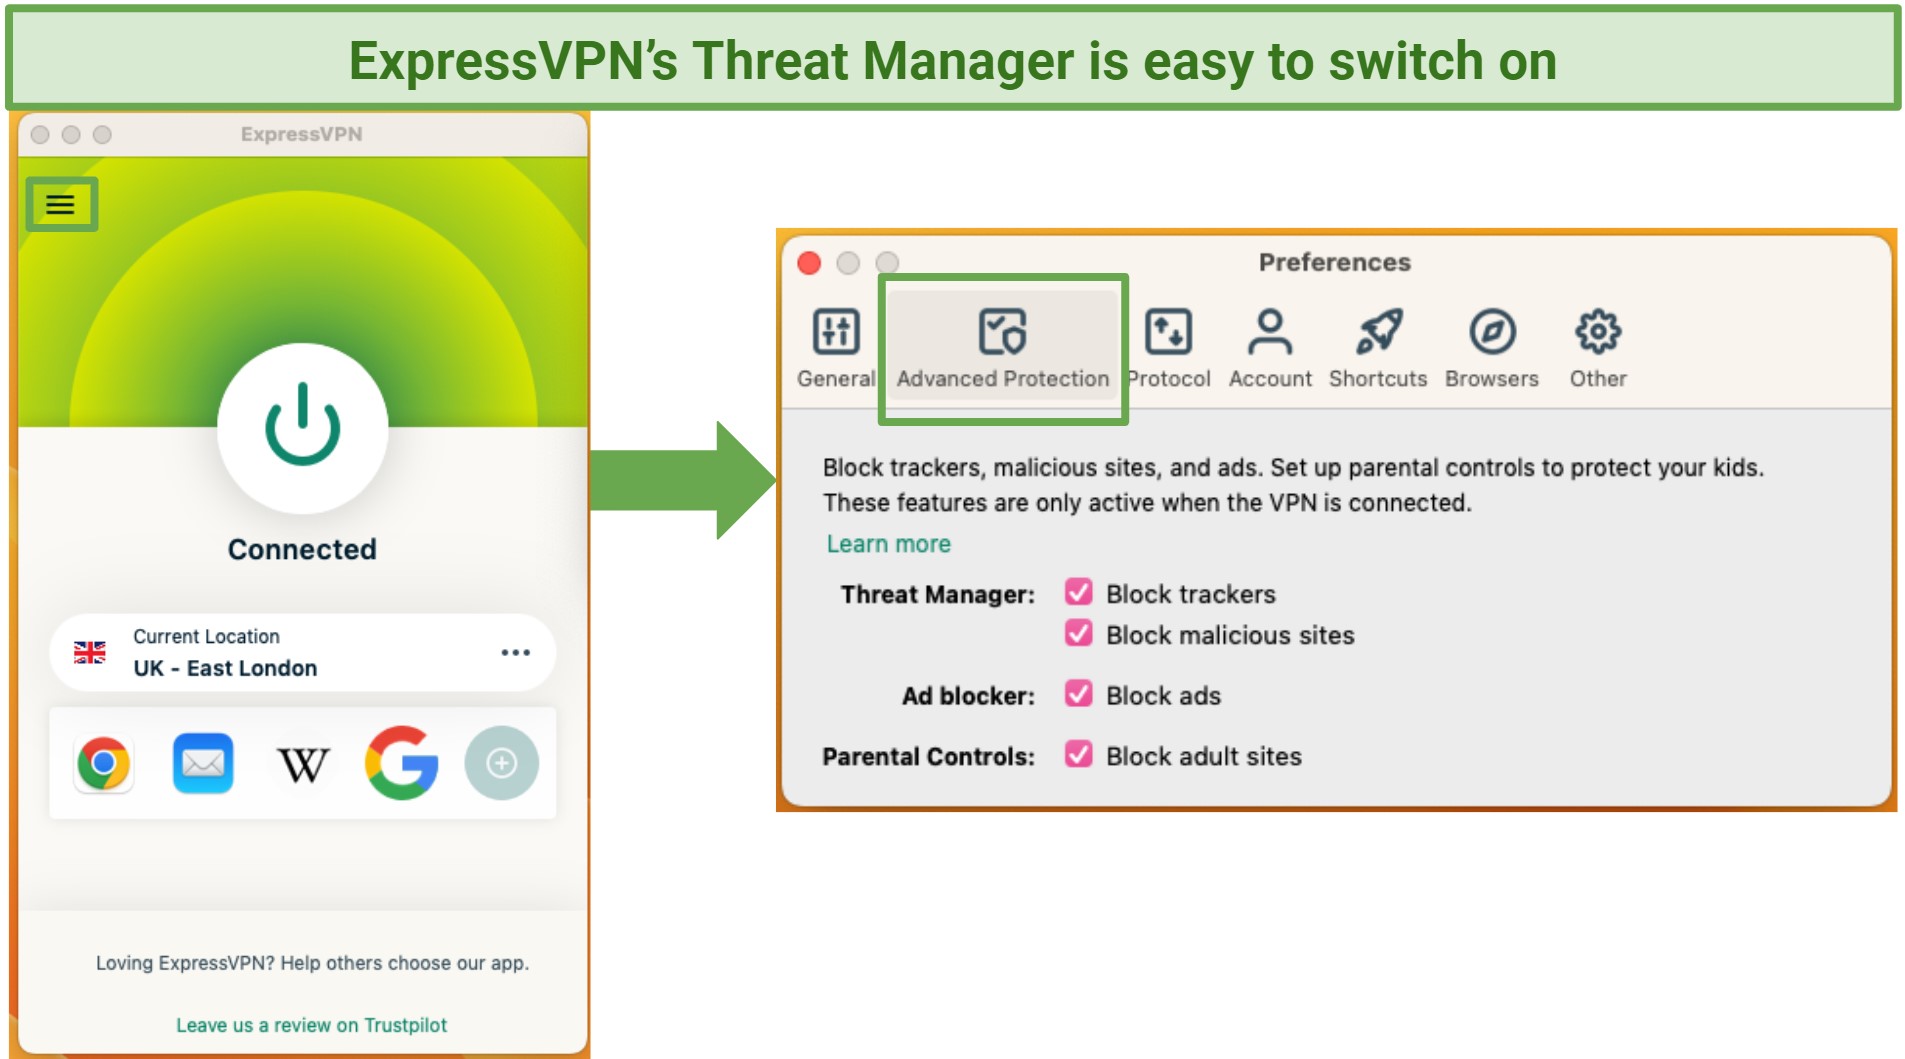 Screenshot of ExpressVPN's Threat Manager and ad blocking feature